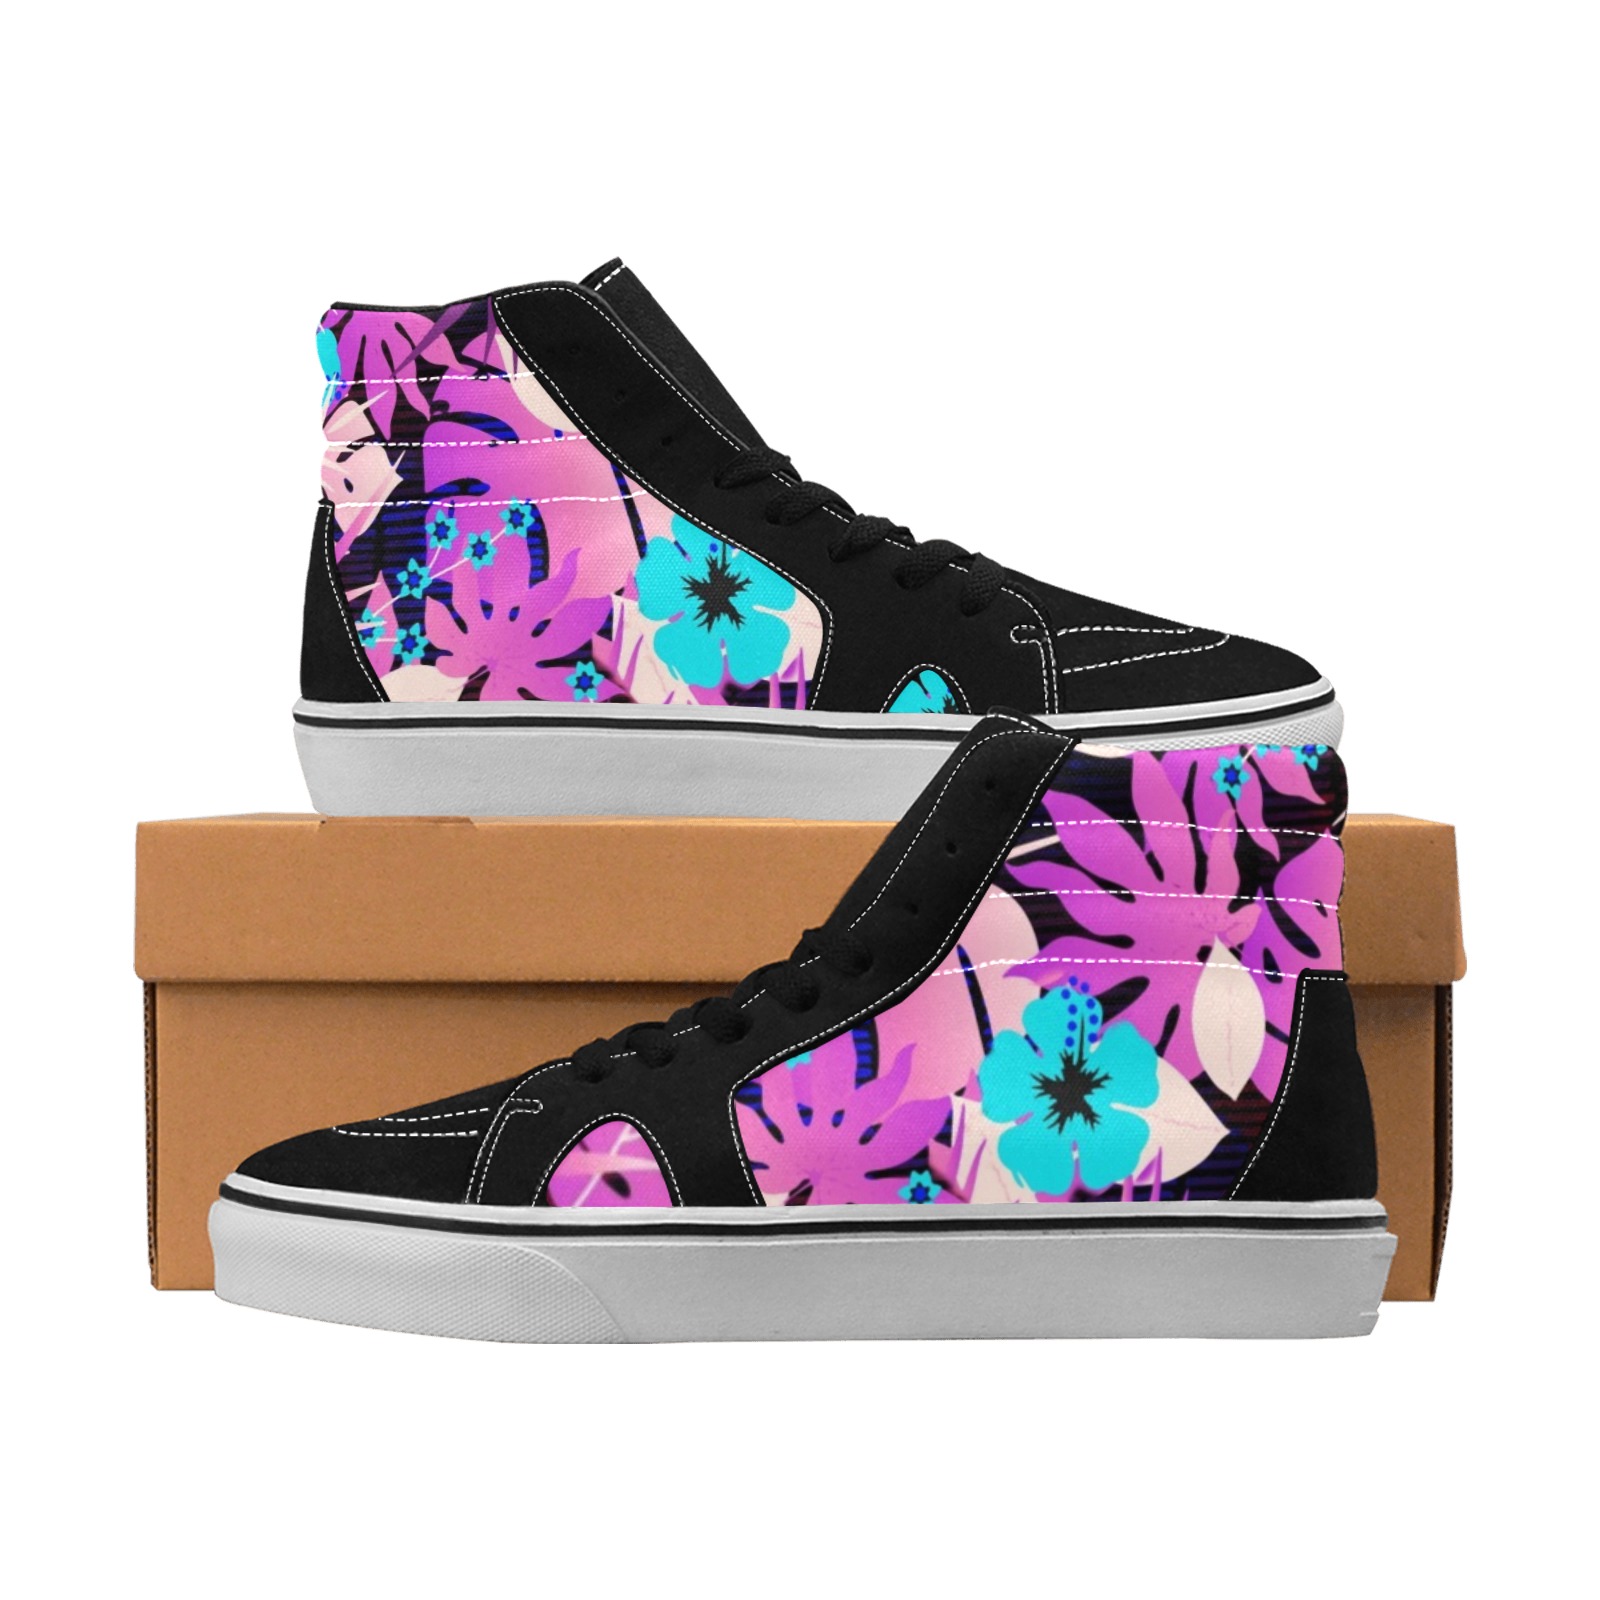 GROOVY FUNK THING FLORAL PURPLE Men's High Top Skateboarding Shoes (Model E001-1)